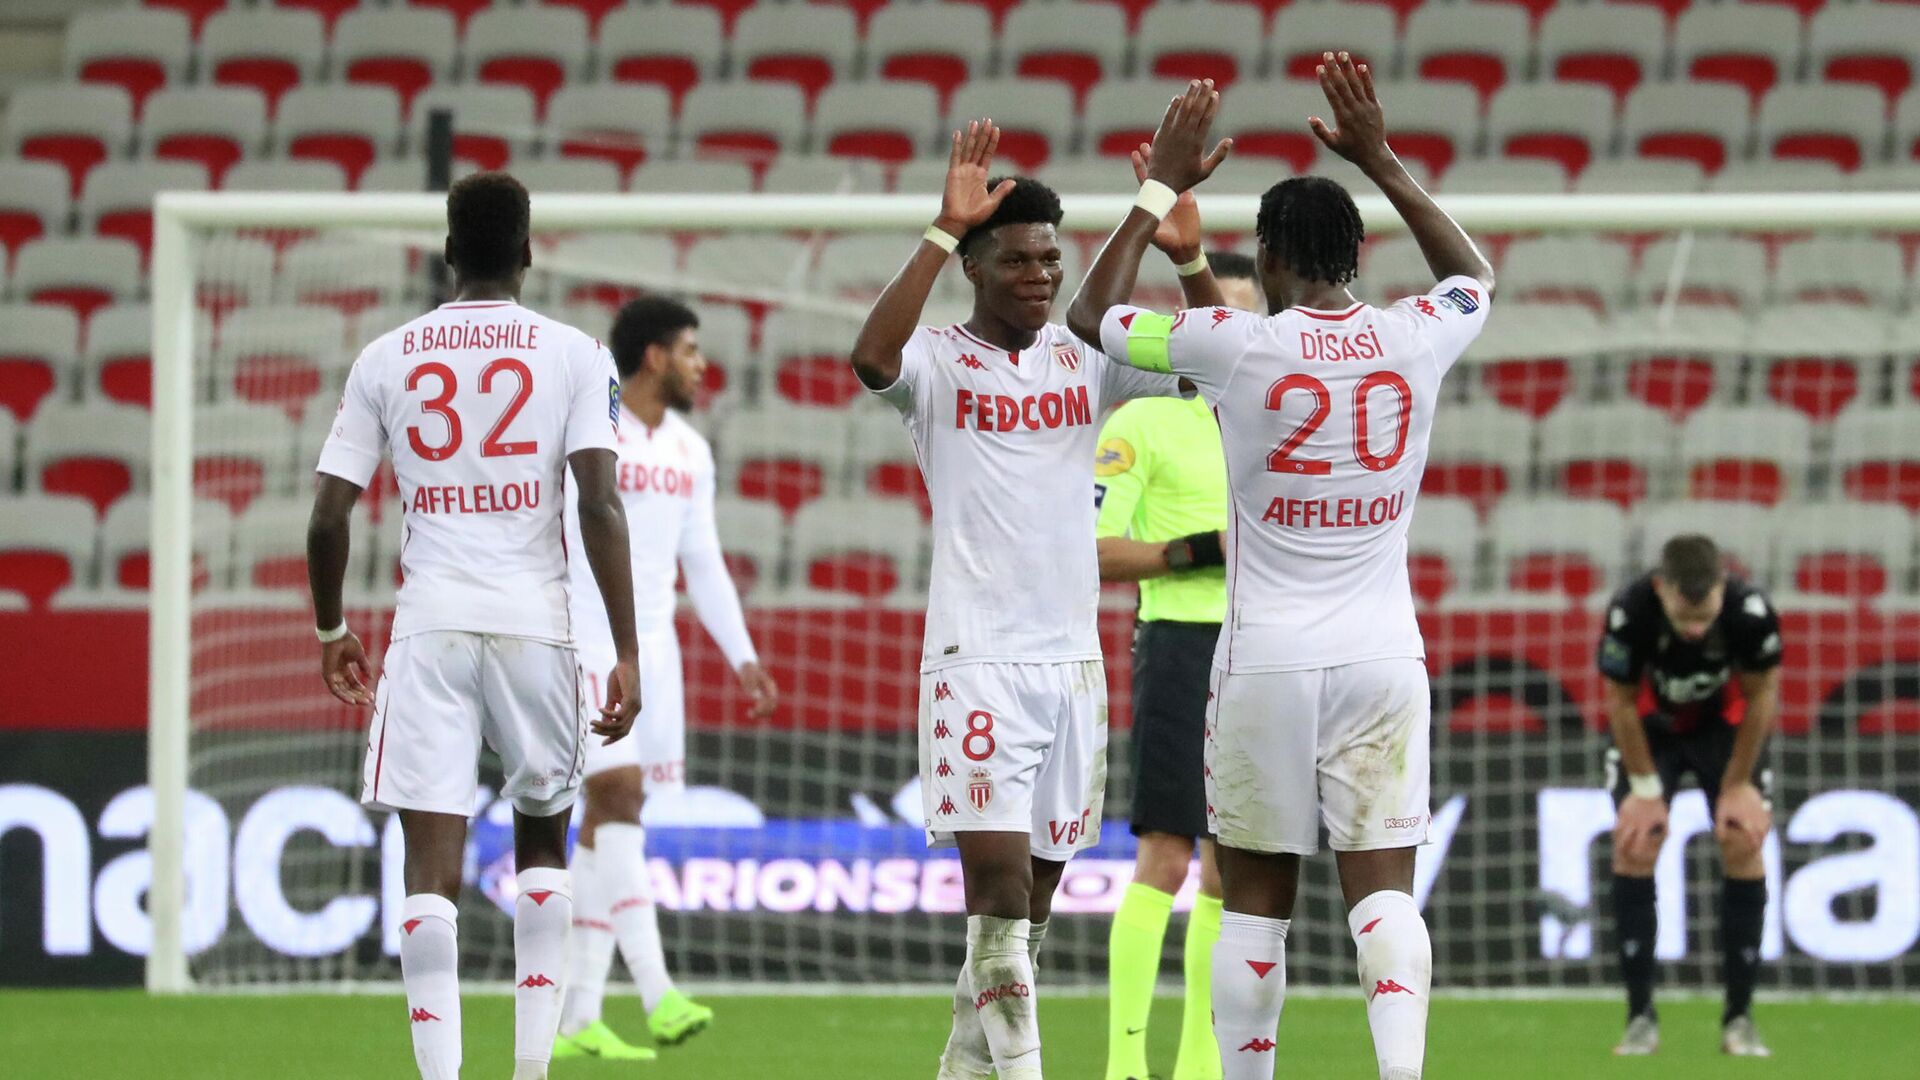 Monaco's French midfielder Aurelien Tchouameni (L) and Monaco's French defender Axel Disasi celebrate after winning the French L1 football match between OGC Nice and AS Monaco FC at The Allianz Riviera Stadium in Nice, south-eastern France on November 08, 2020. (Photo by Valery HACHE / AFP) - РИА Новости, 1920, 08.11.2020